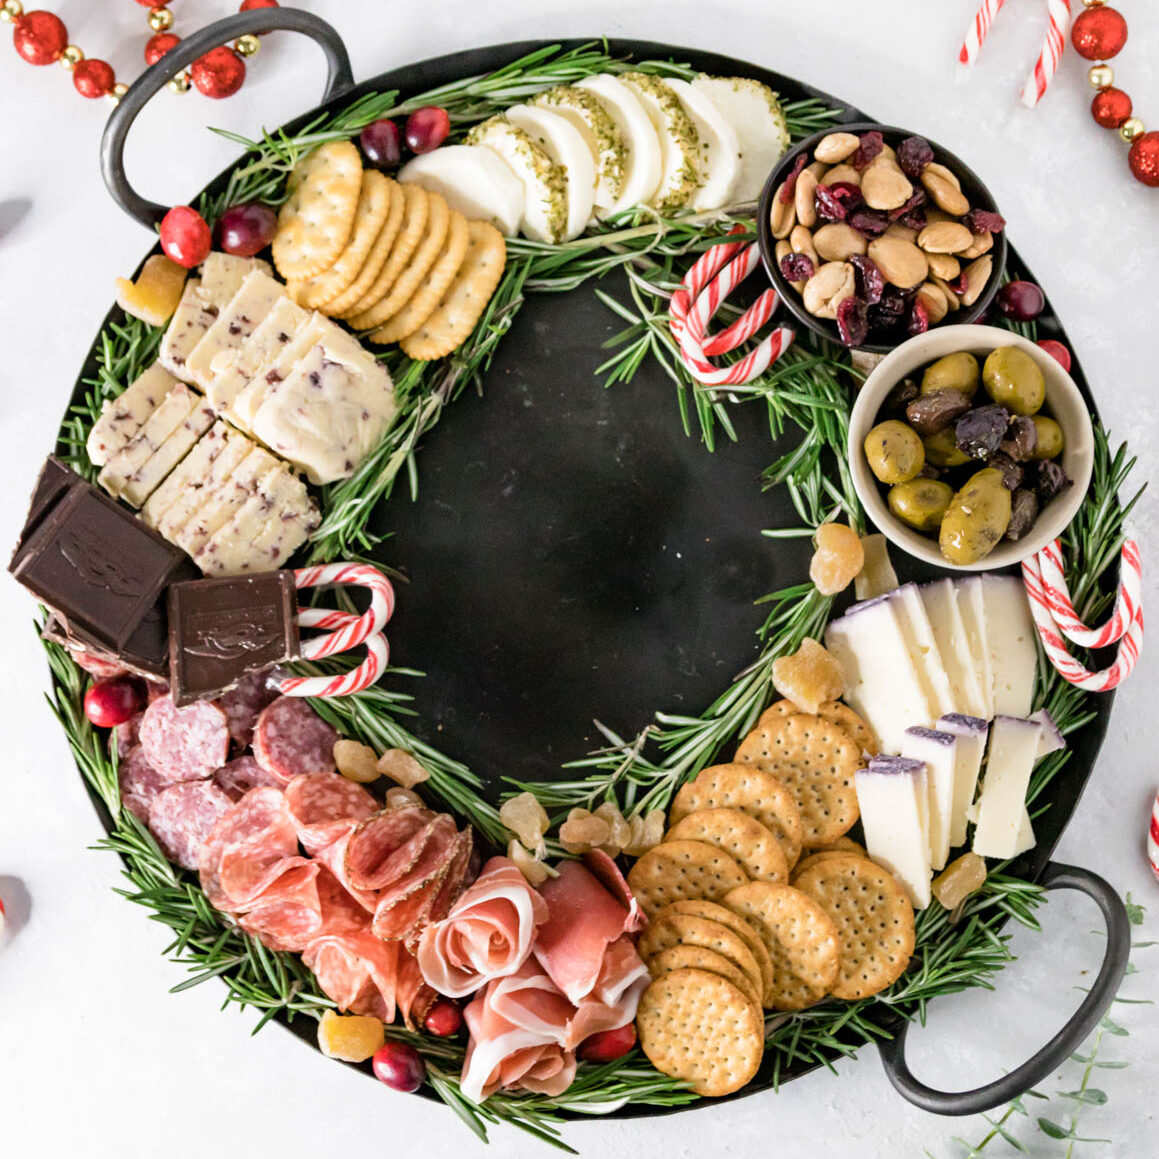 top view of the cheese board showing the wreath shape